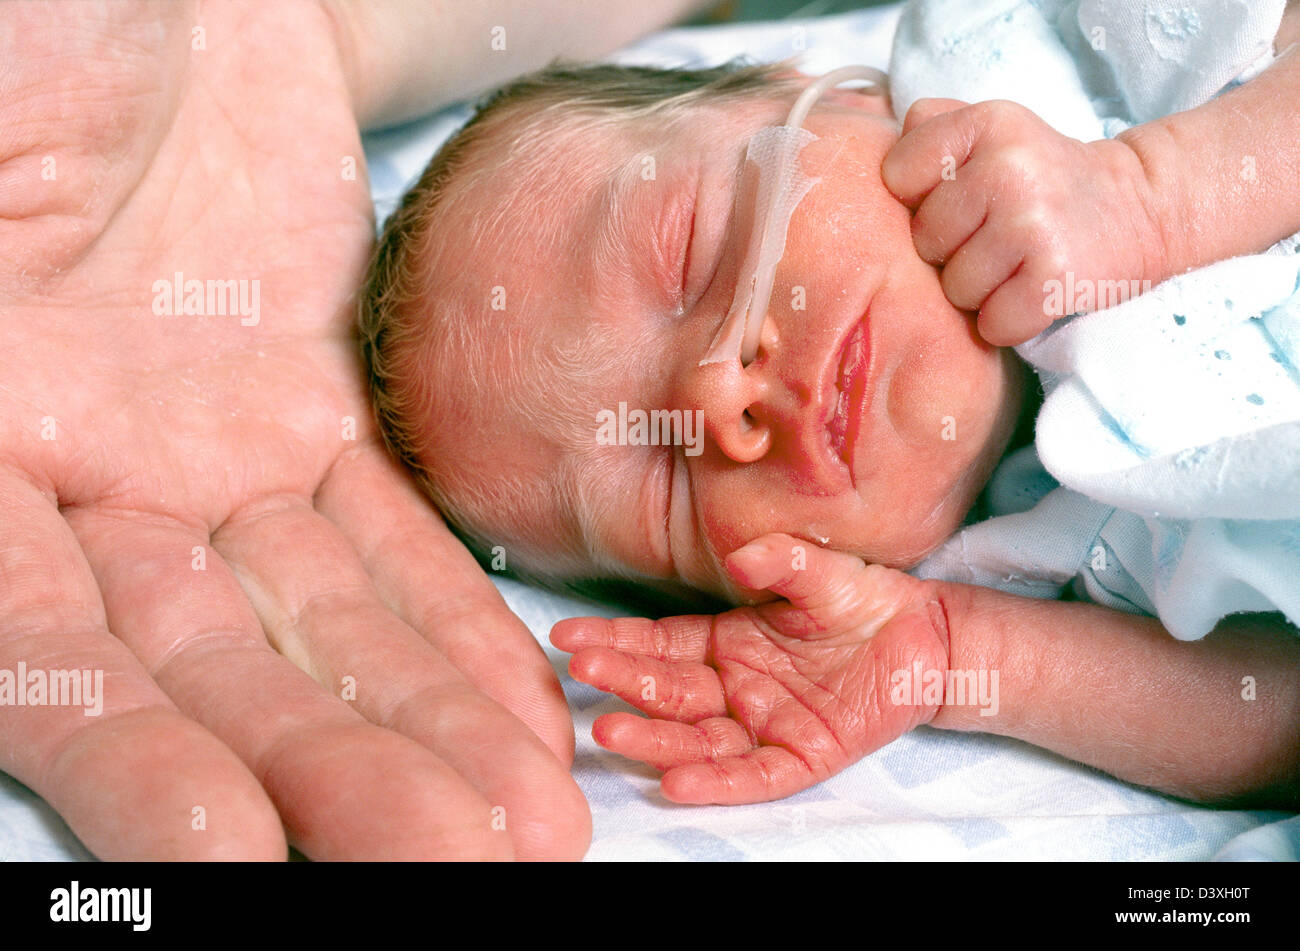 Premature baby with a feeding tube in an incubator Stock Photo